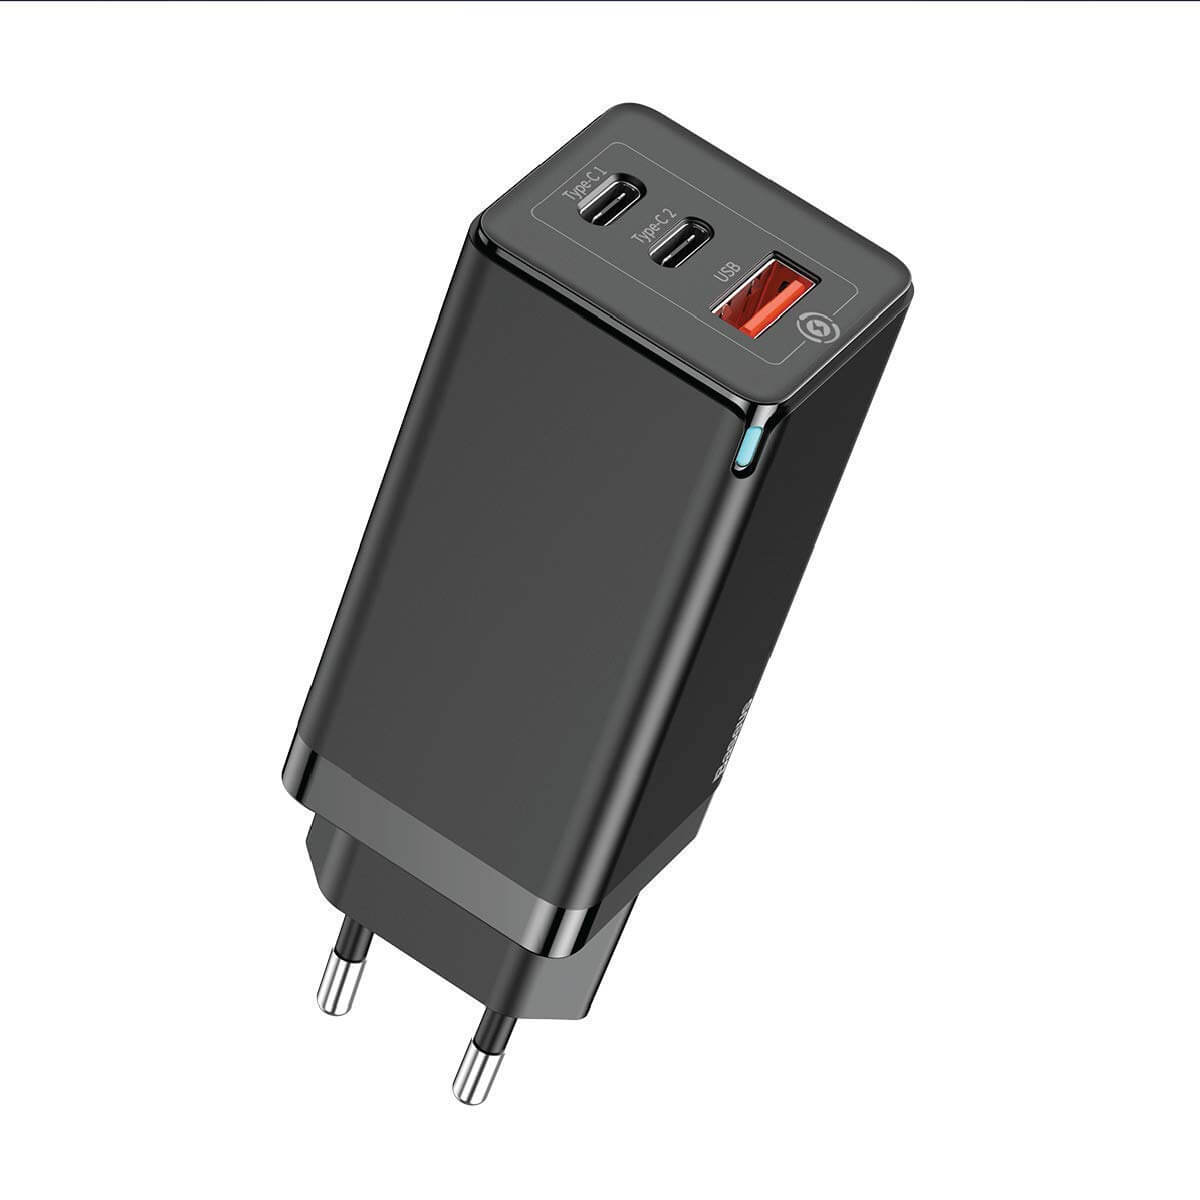 Baseus 65W GaN Charger Quick Charge 4.0 3.0 Type C PD USB Charger with QC  4.0